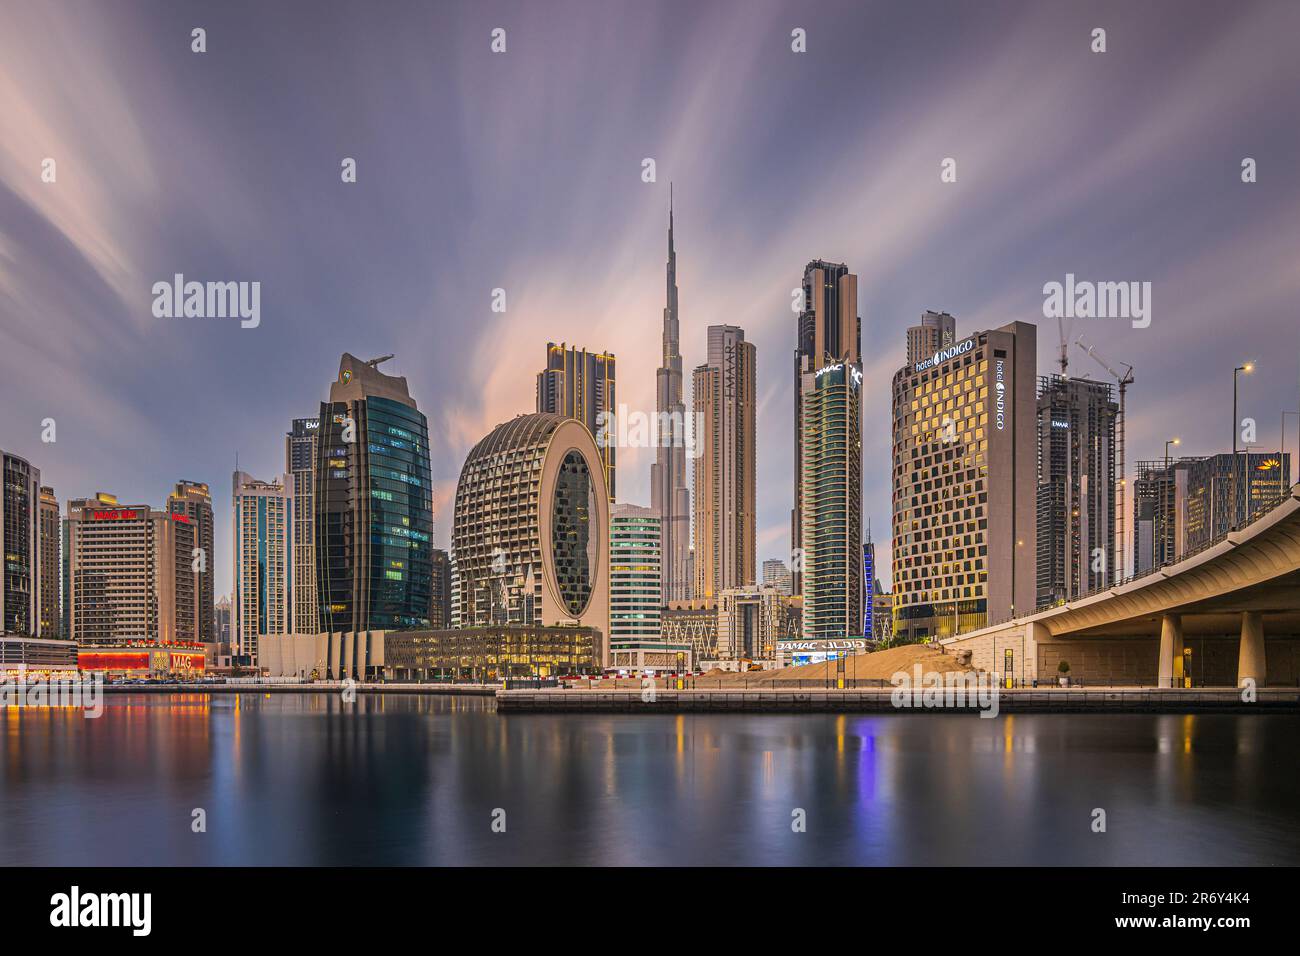 Dubai in the evening after sunset. United arab emirates city skyline. High-rise buildings with lighting. City center view Reflection of the city light Stock Photo